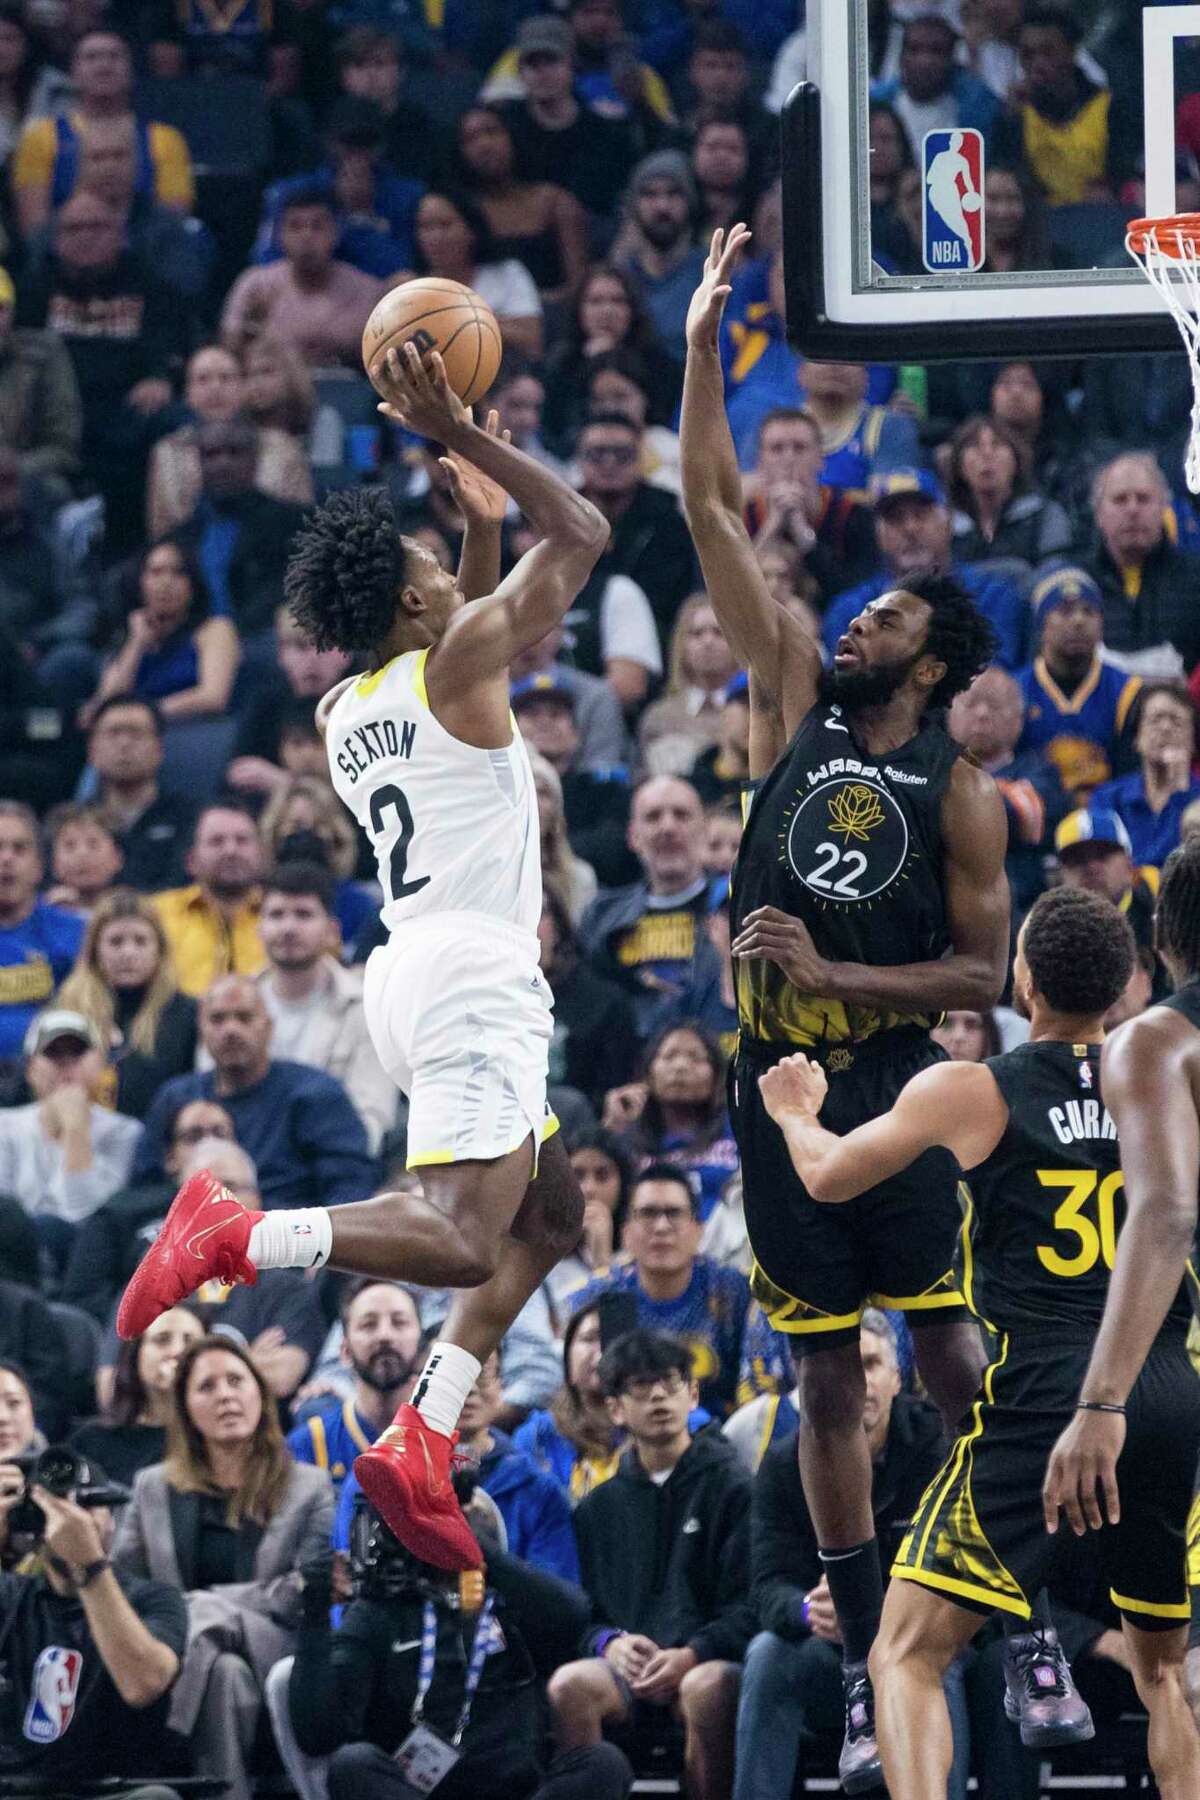 Utah Jazz guard Collin Sexton (2) shoots over Golden State Warriors forward Andrew Wiggins (22) during the first half of an NBA basketball game in San Francisco, Friday, Nov. 25, 2022. (AP Photo/John Hefti)